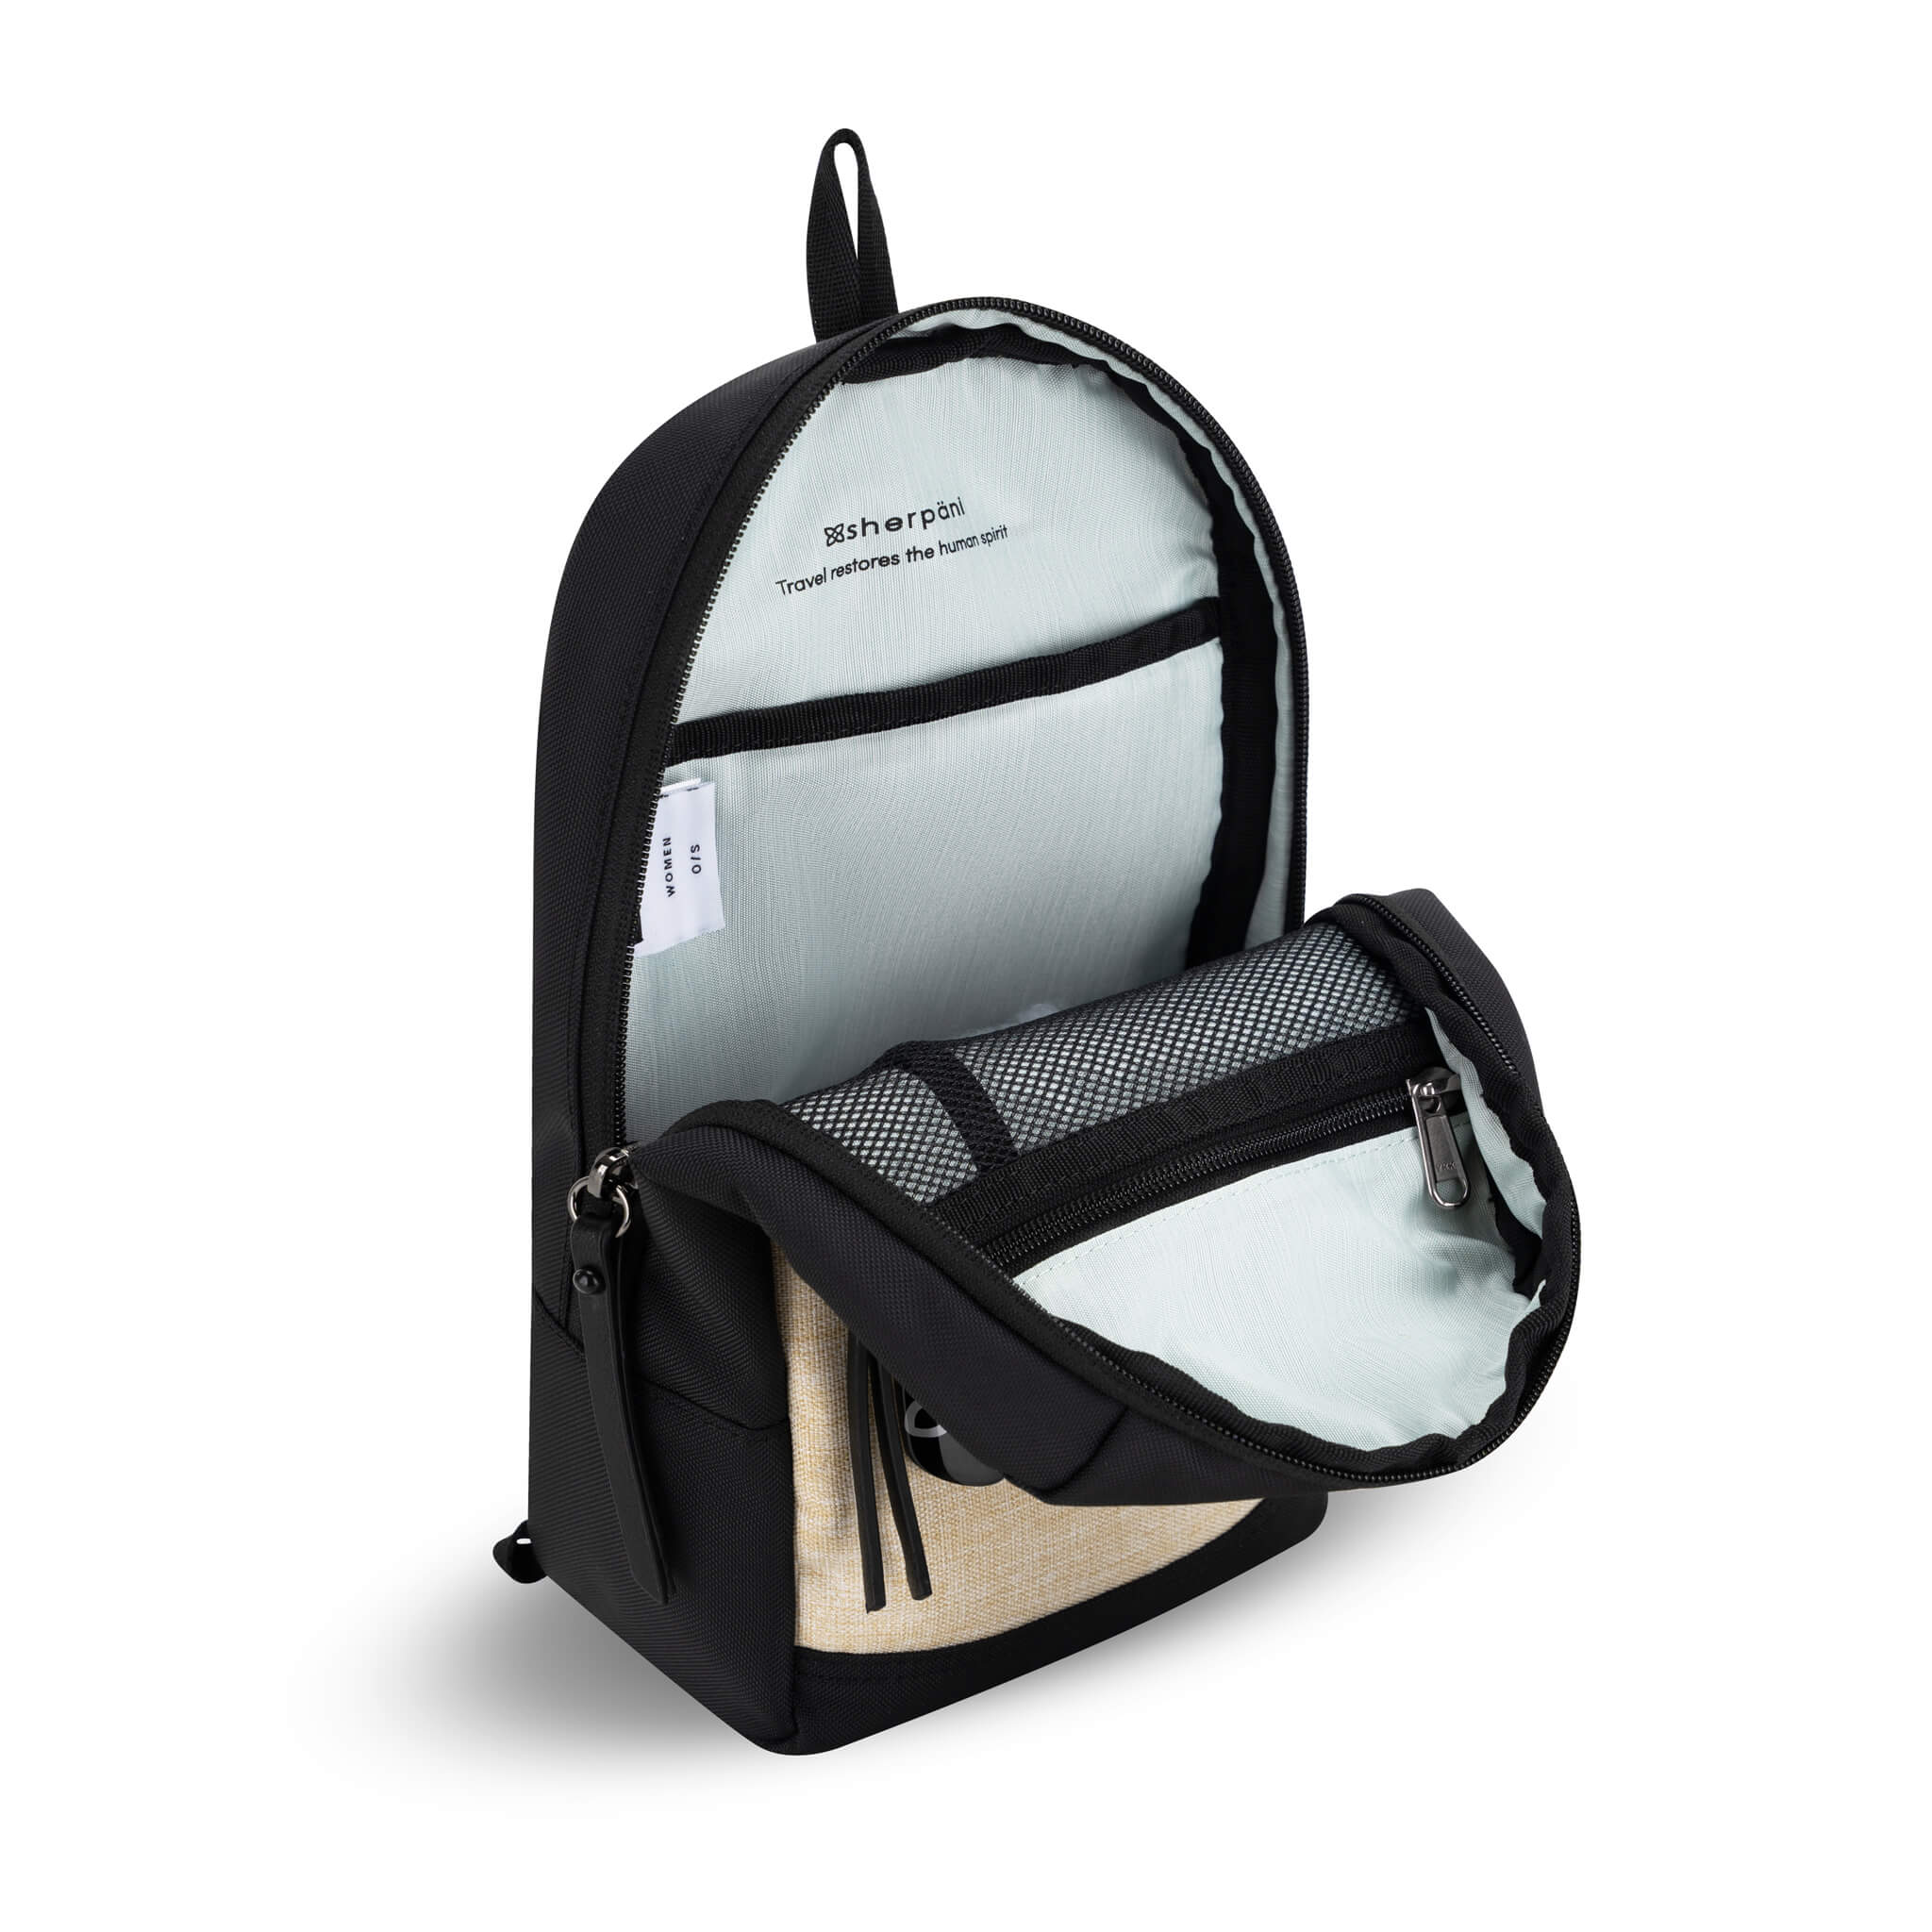 Inside view of Sherpani travel sling bag, the Metro. "Travel restores the human spirit" is printed on a light-colored interior. Features include zipper pockets made from see-through mesh for visibility. 